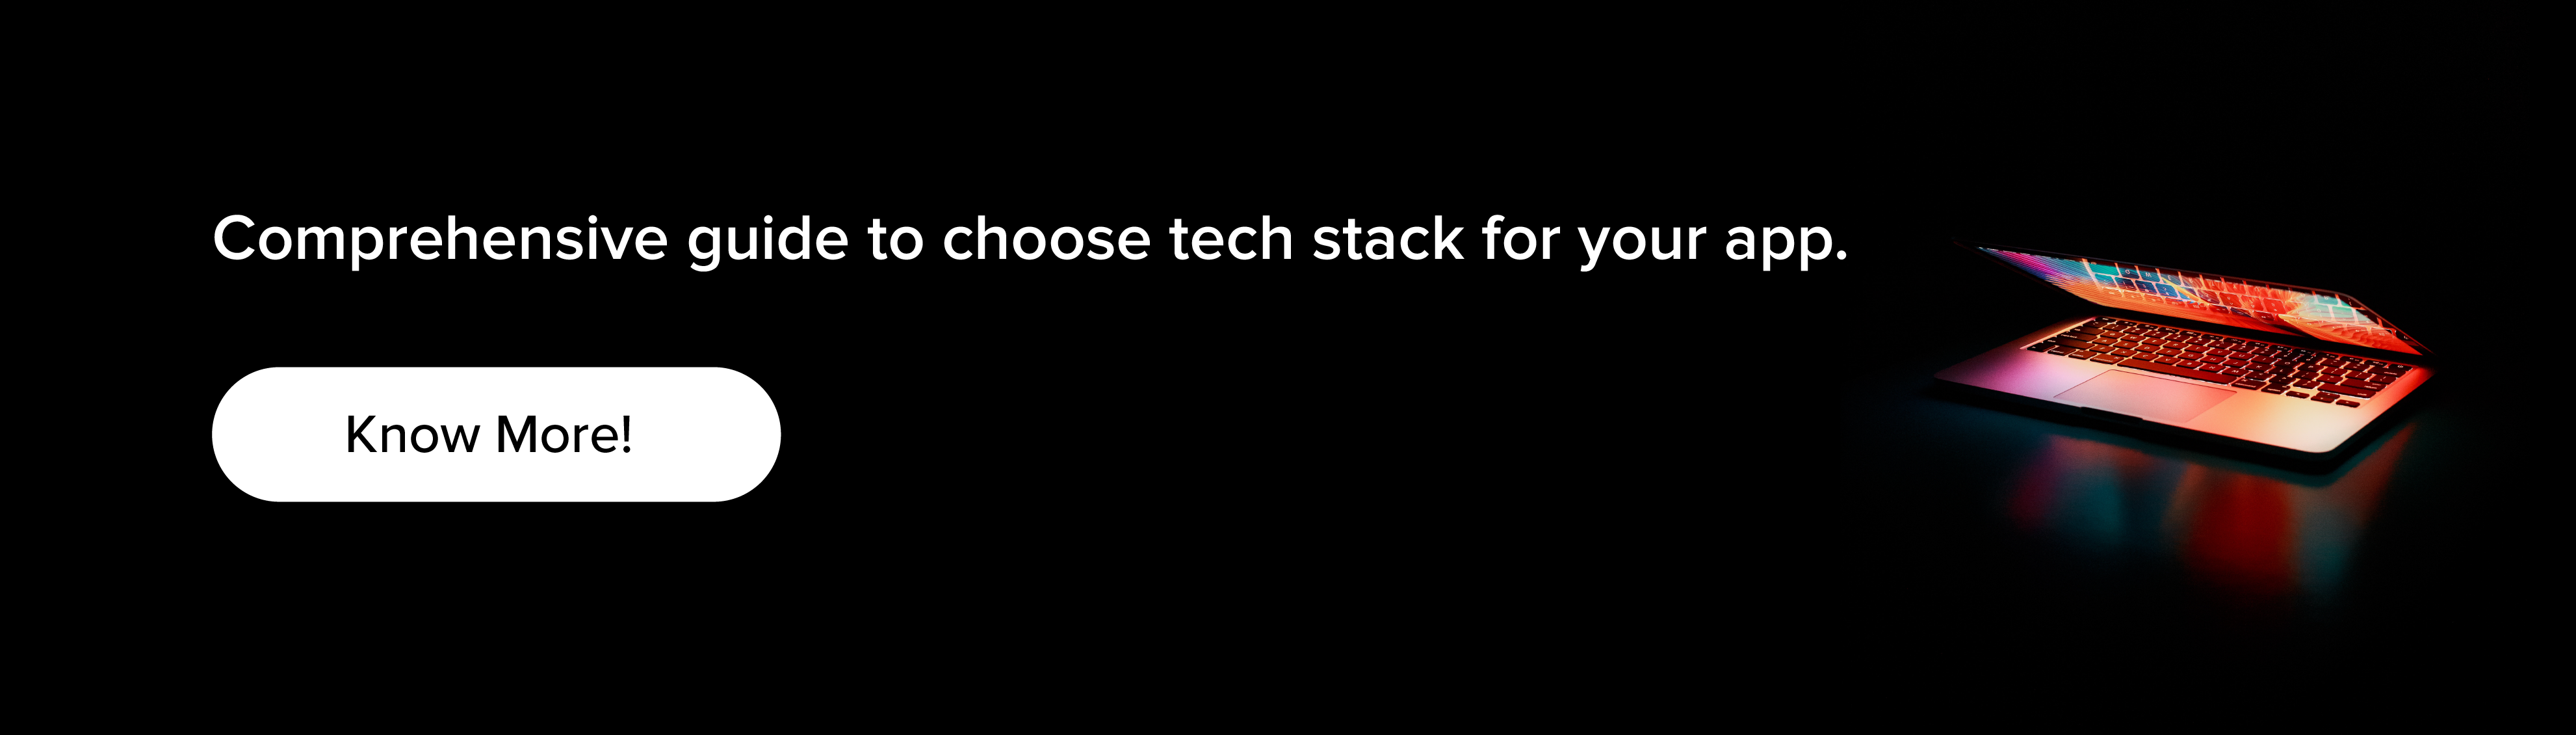 Comprehensive guide to choose tech stack for your app.